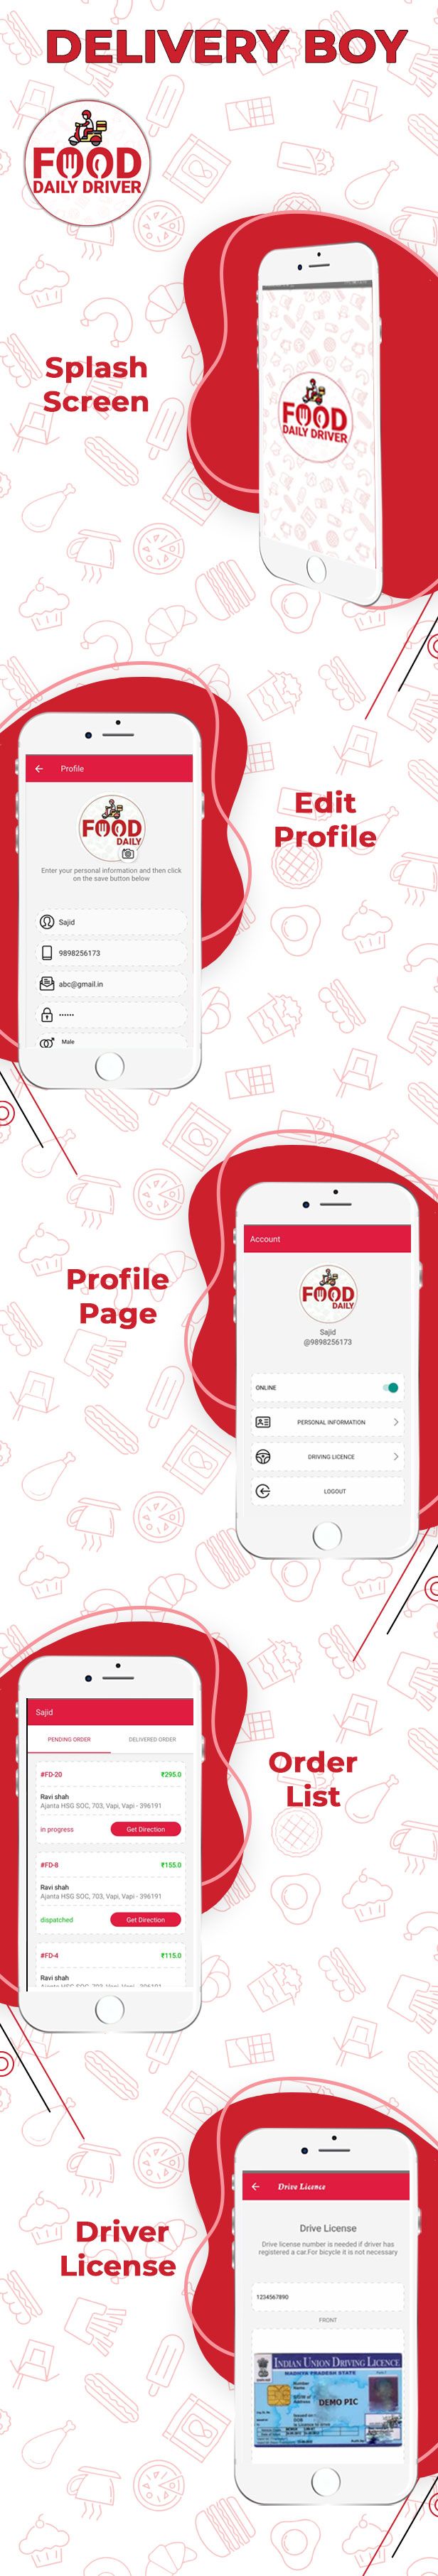 Food Daily - An On Demand Android Food Delivery App, Delivery Boy App and Restaurant App - 4